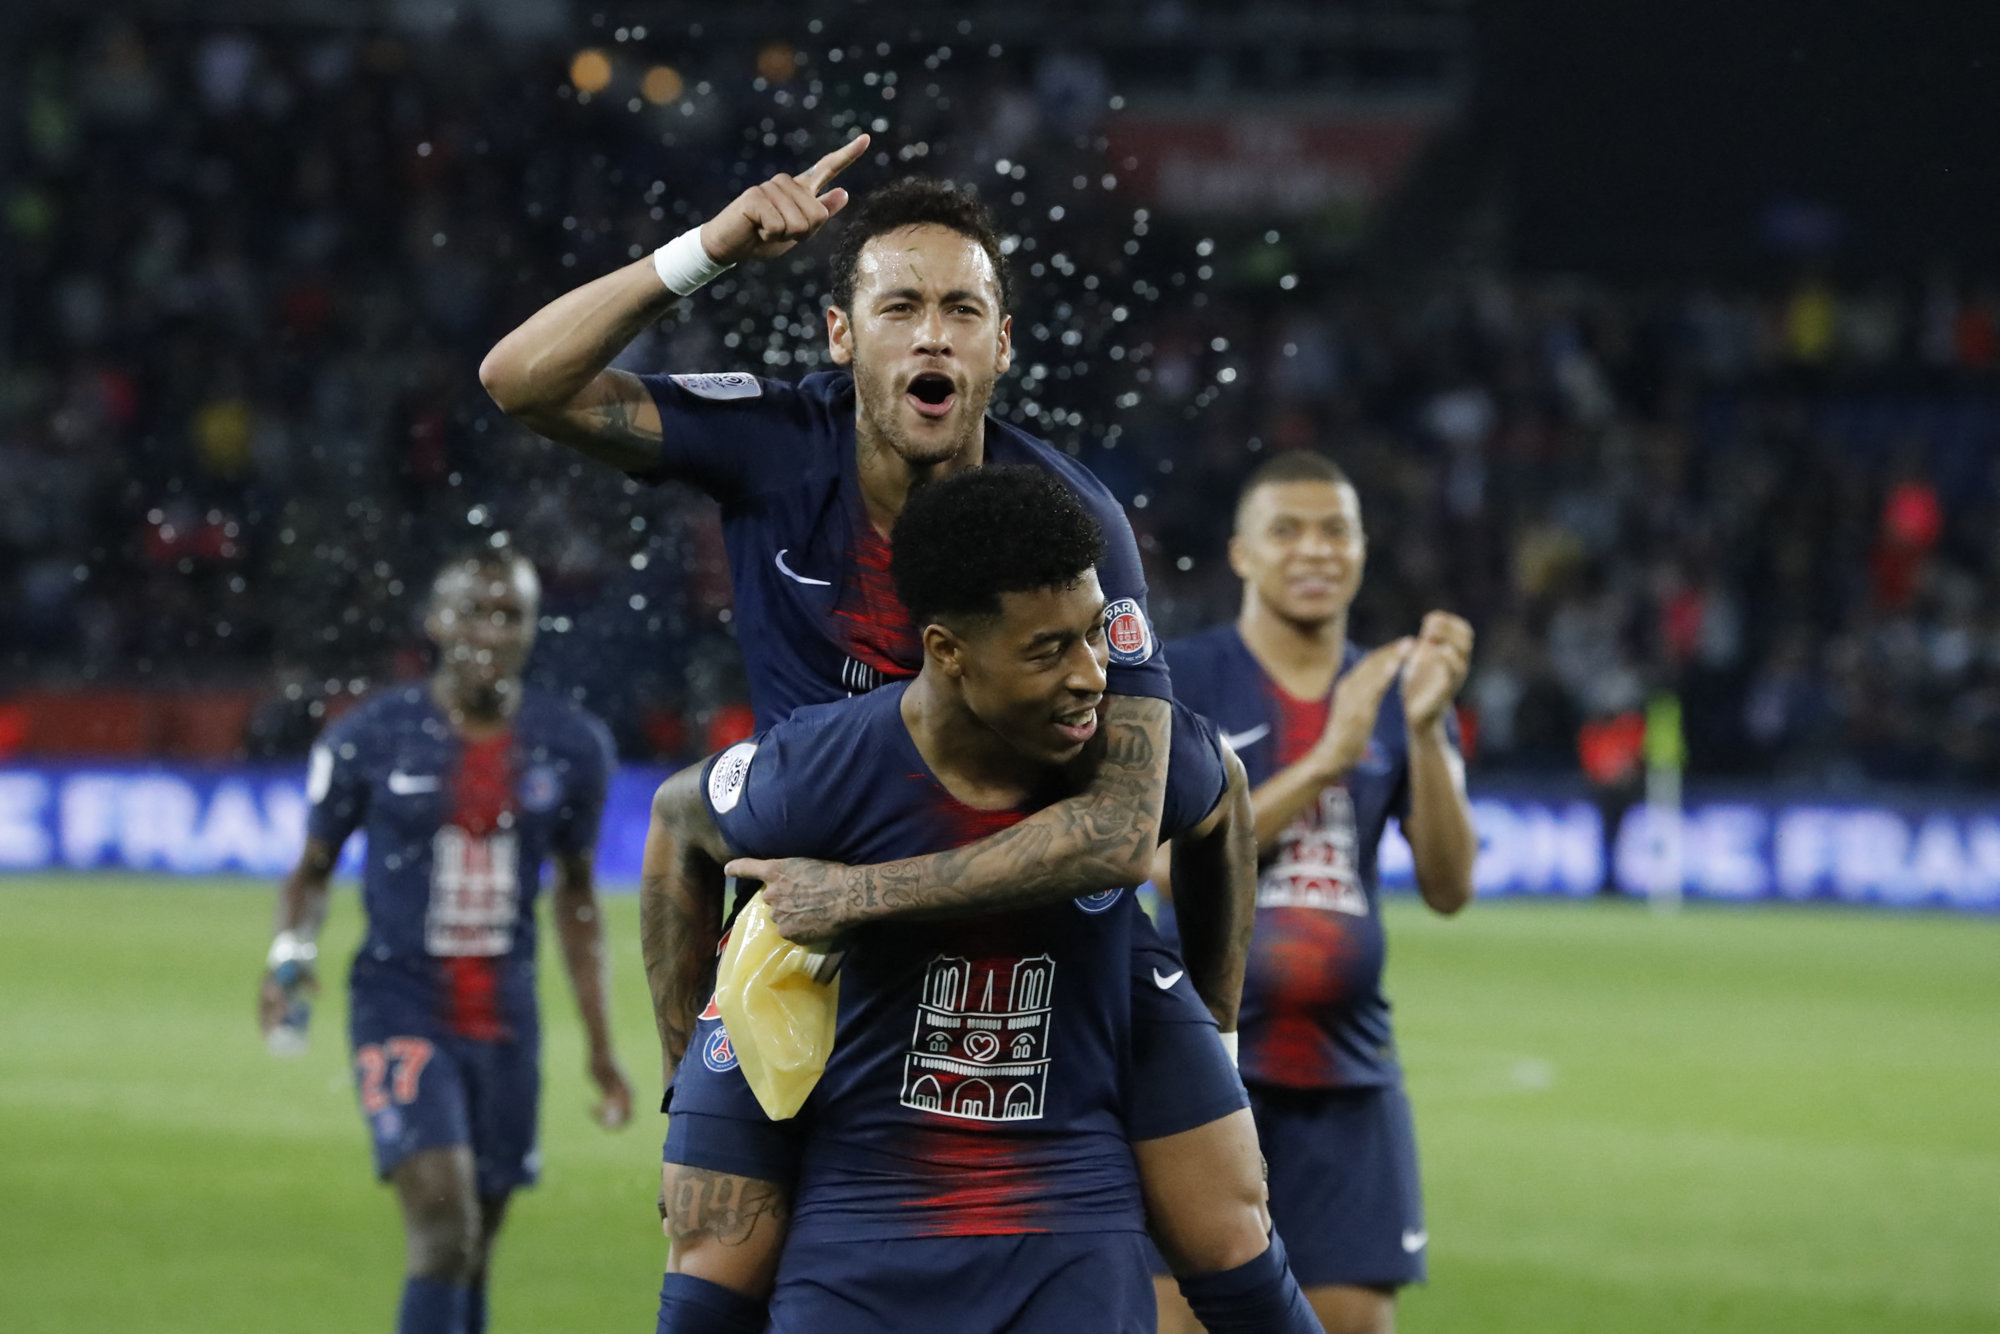 The Unfortunate PSG Player On Course For An Unwanted Goals Record